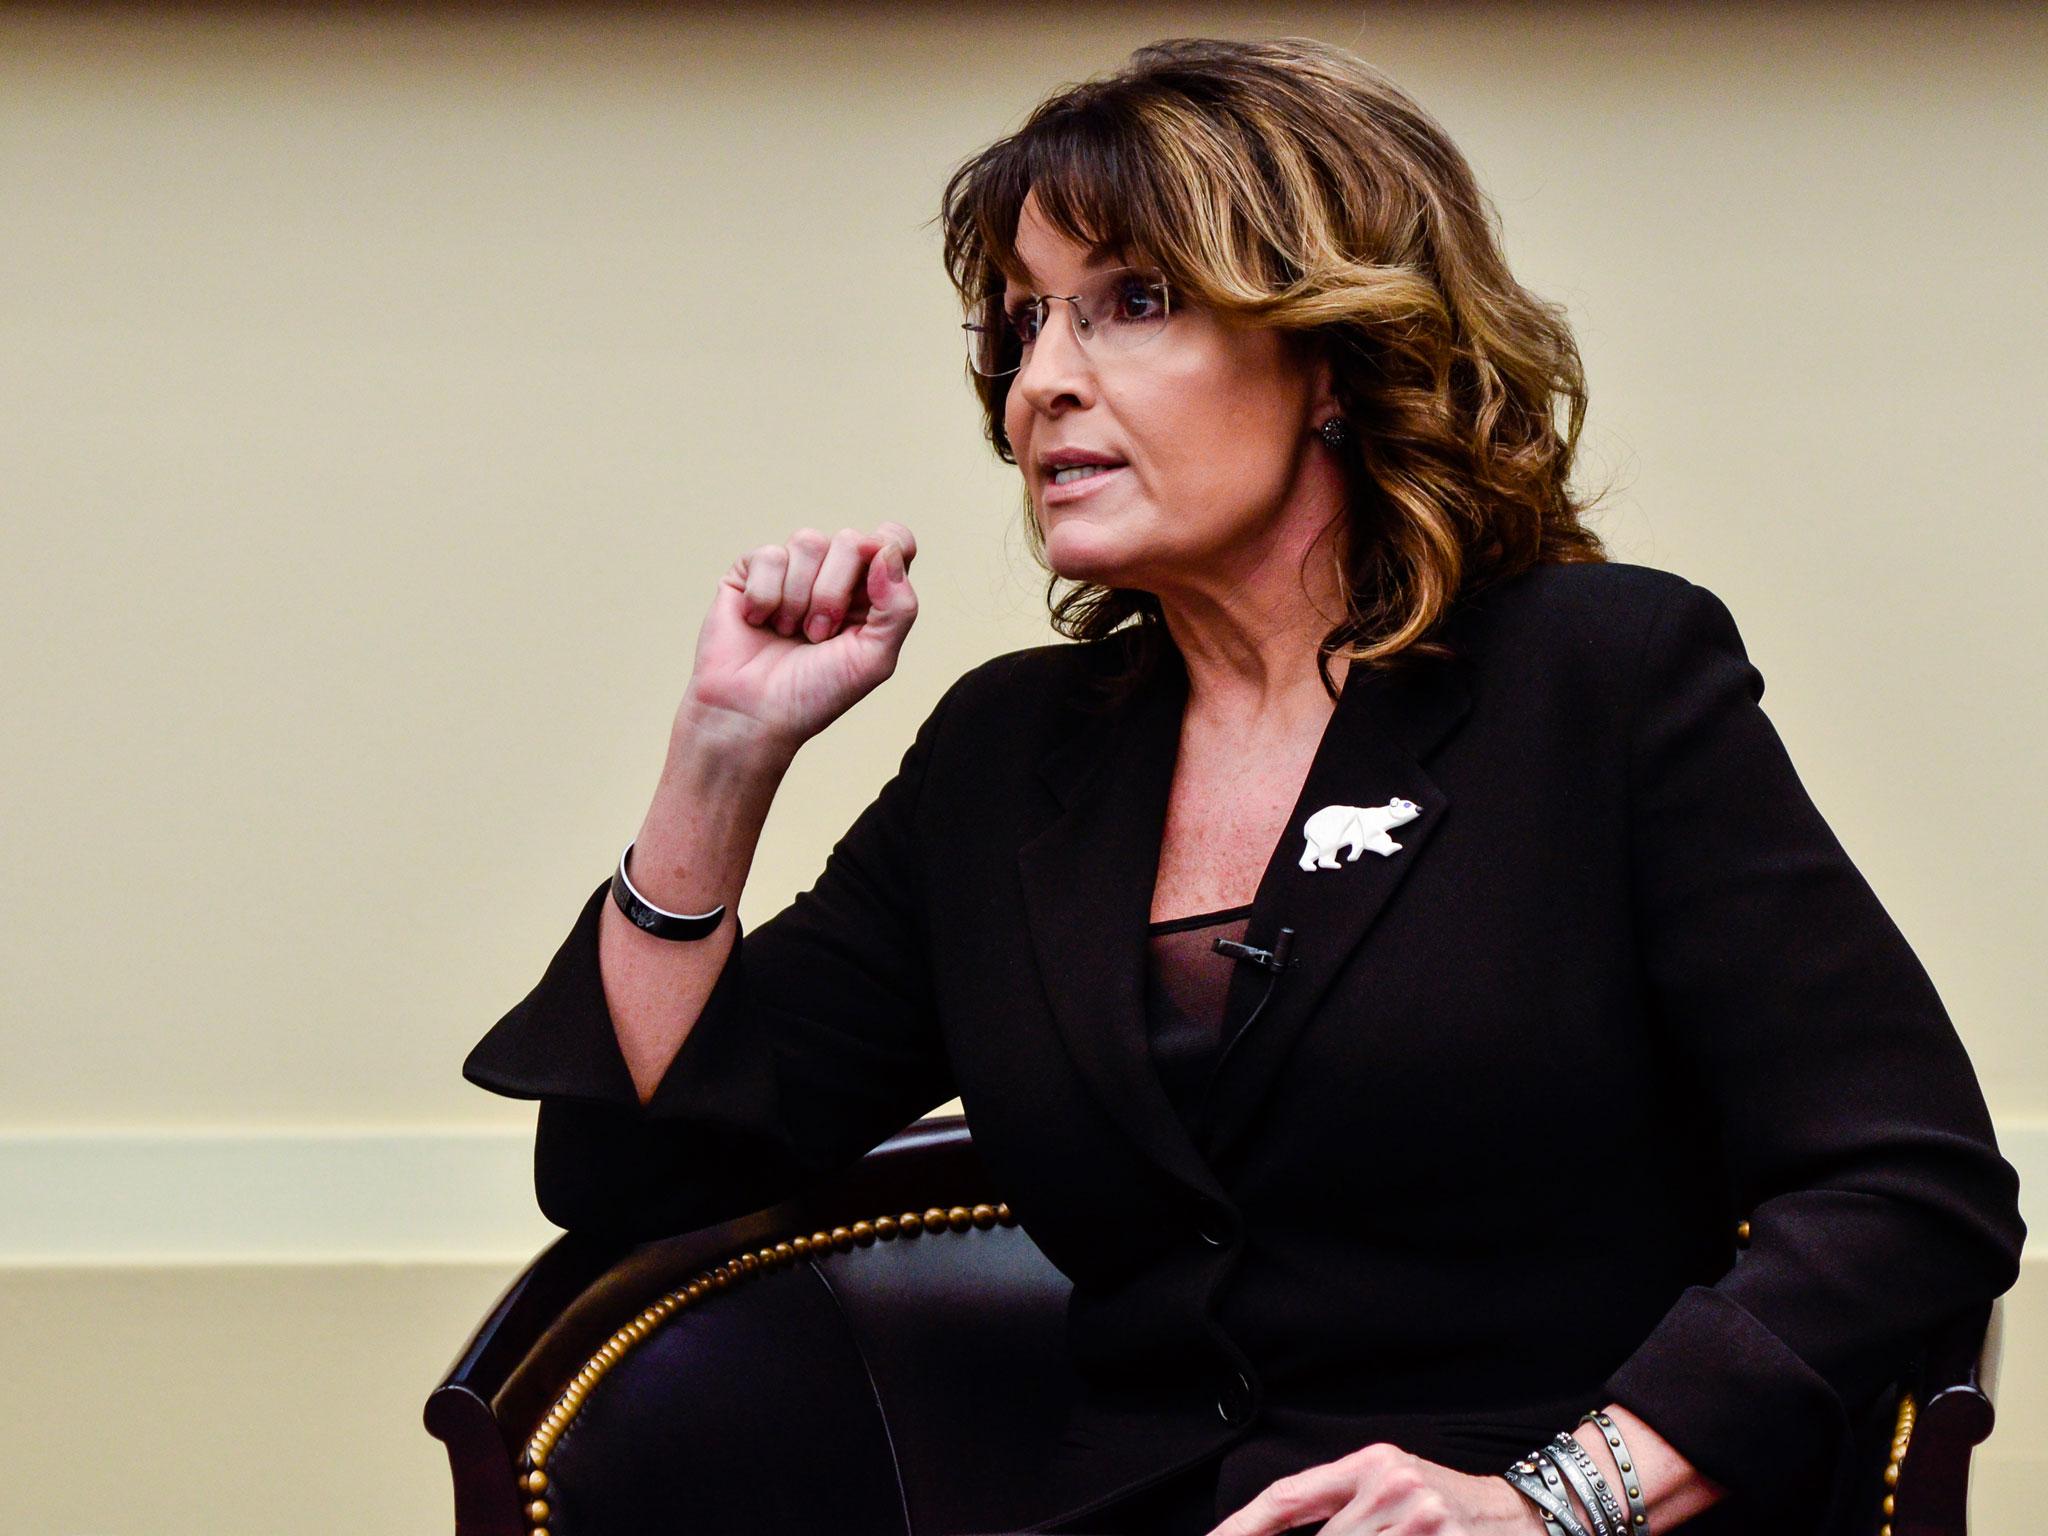 Ms Palin fast rose to prominence among Tea Party Republicans when she ran on McCain's presidential ticket